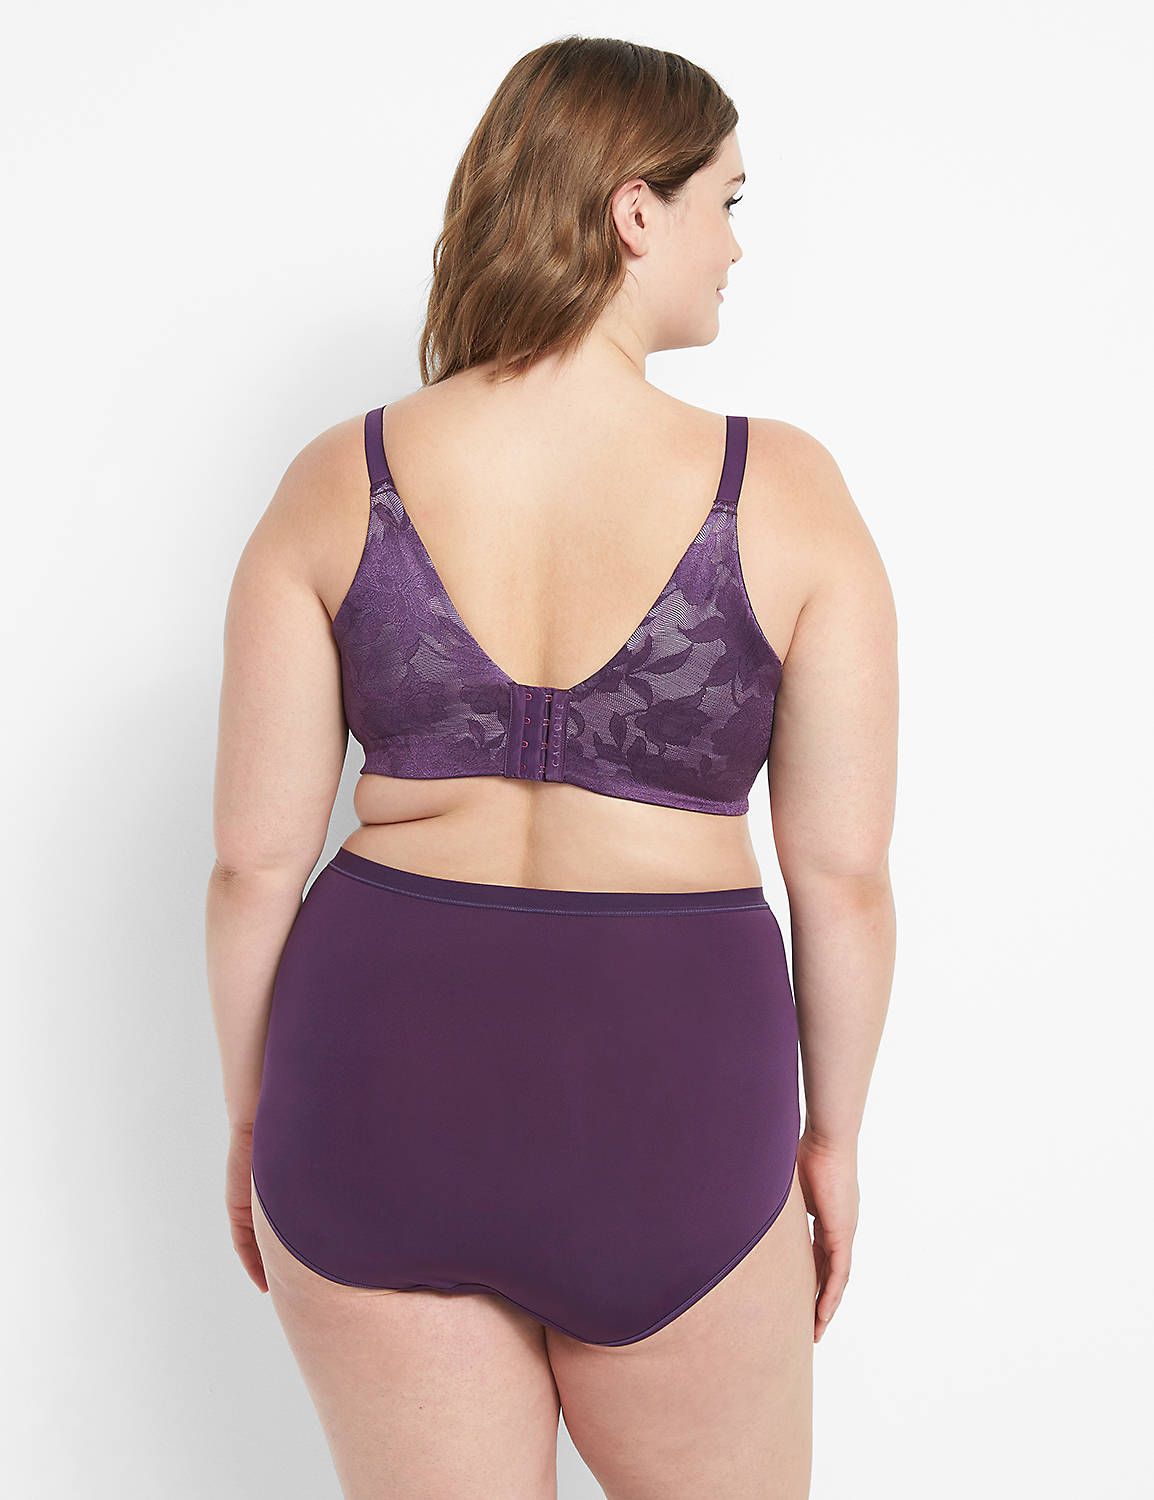 Backsmoothing Lightly Lined Full Coverage UW with Satin Lace - 1112964 F -  1115331 S:PANTONE Purple Pennant:44C